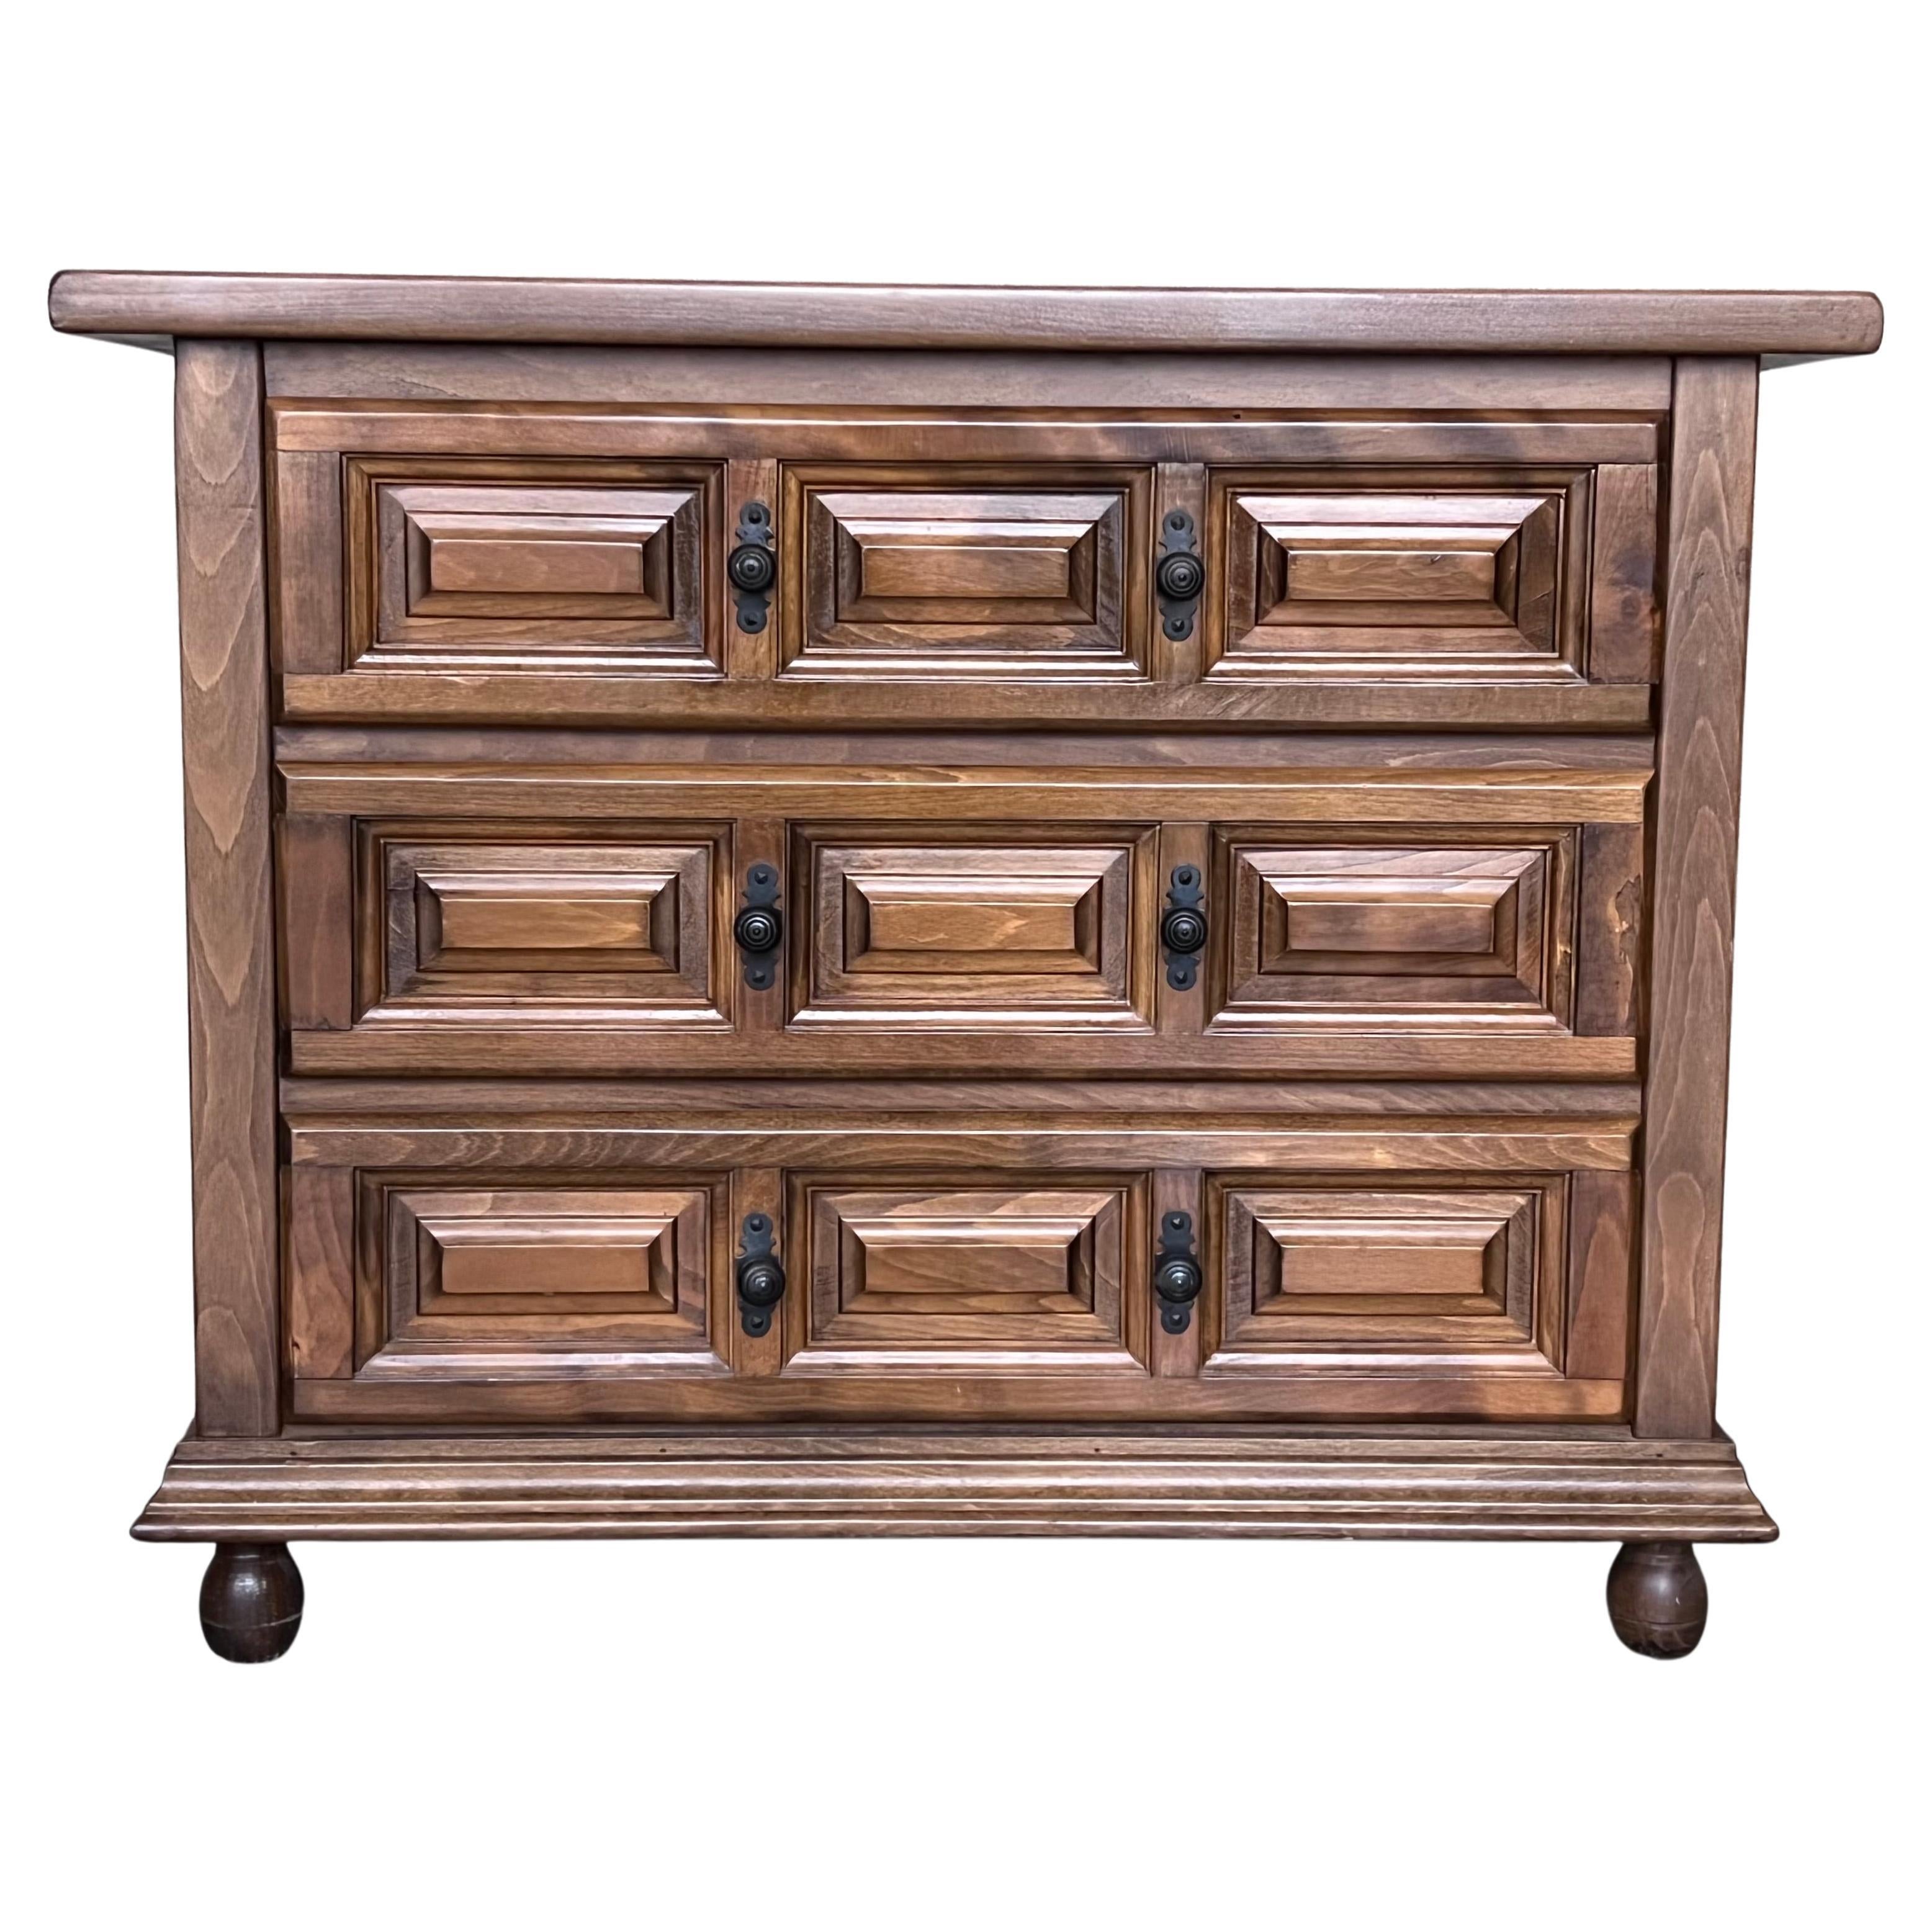 20th Catalan Spanish Baroque Carved Walnut Tuscan Three Drawers Chest of Drawers